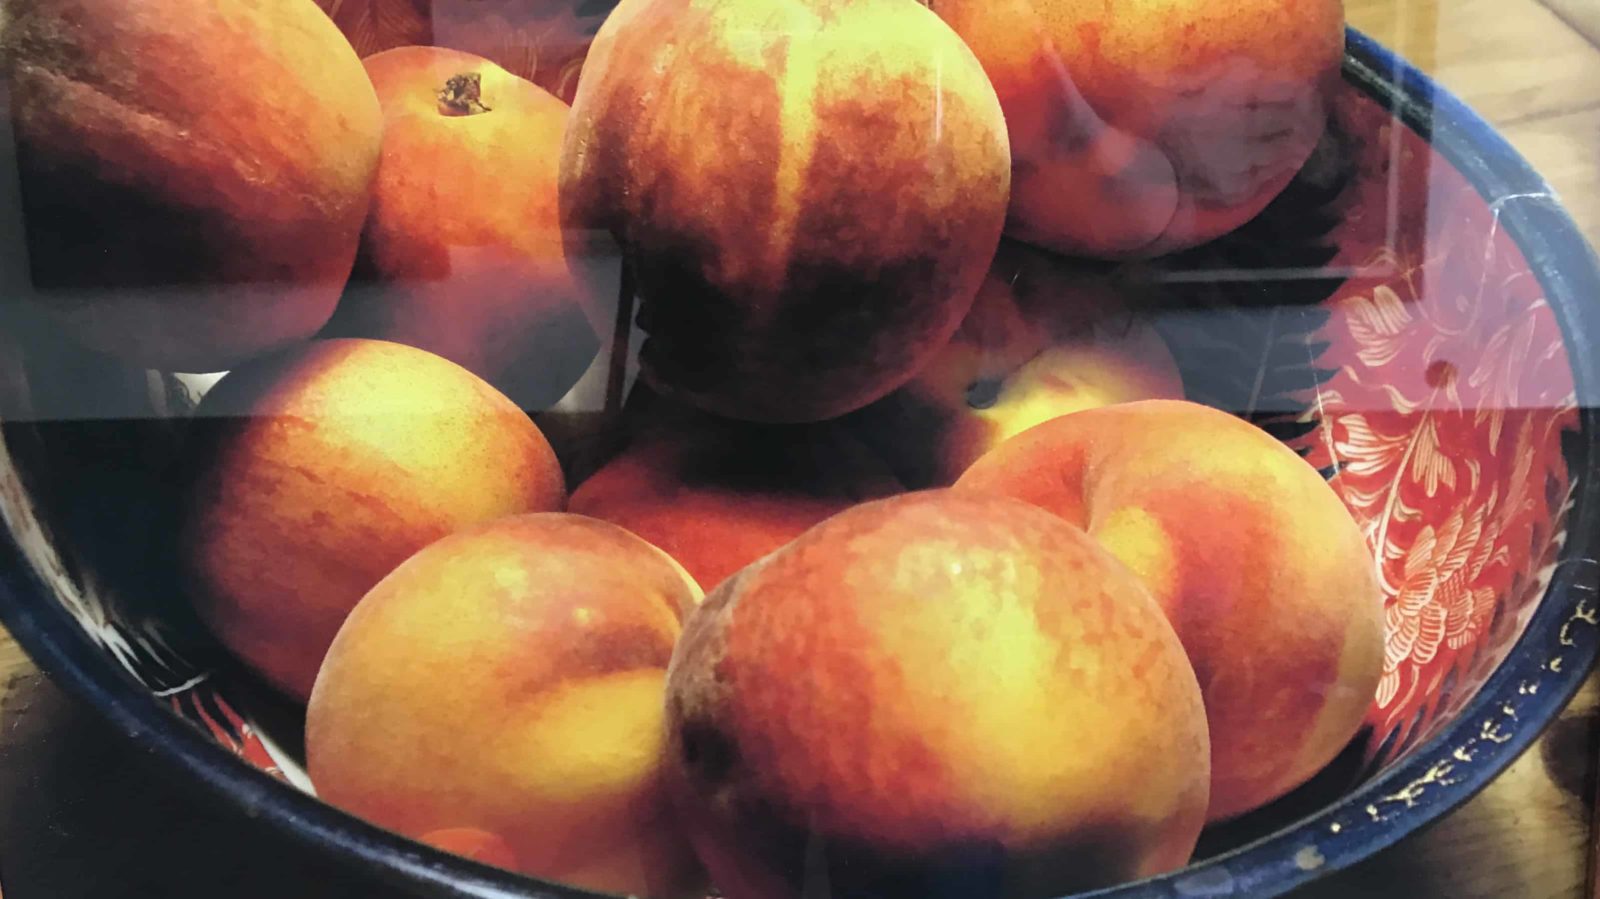 Doanne Perry's 'Peaches' shows the amber-gold shading on their skin.